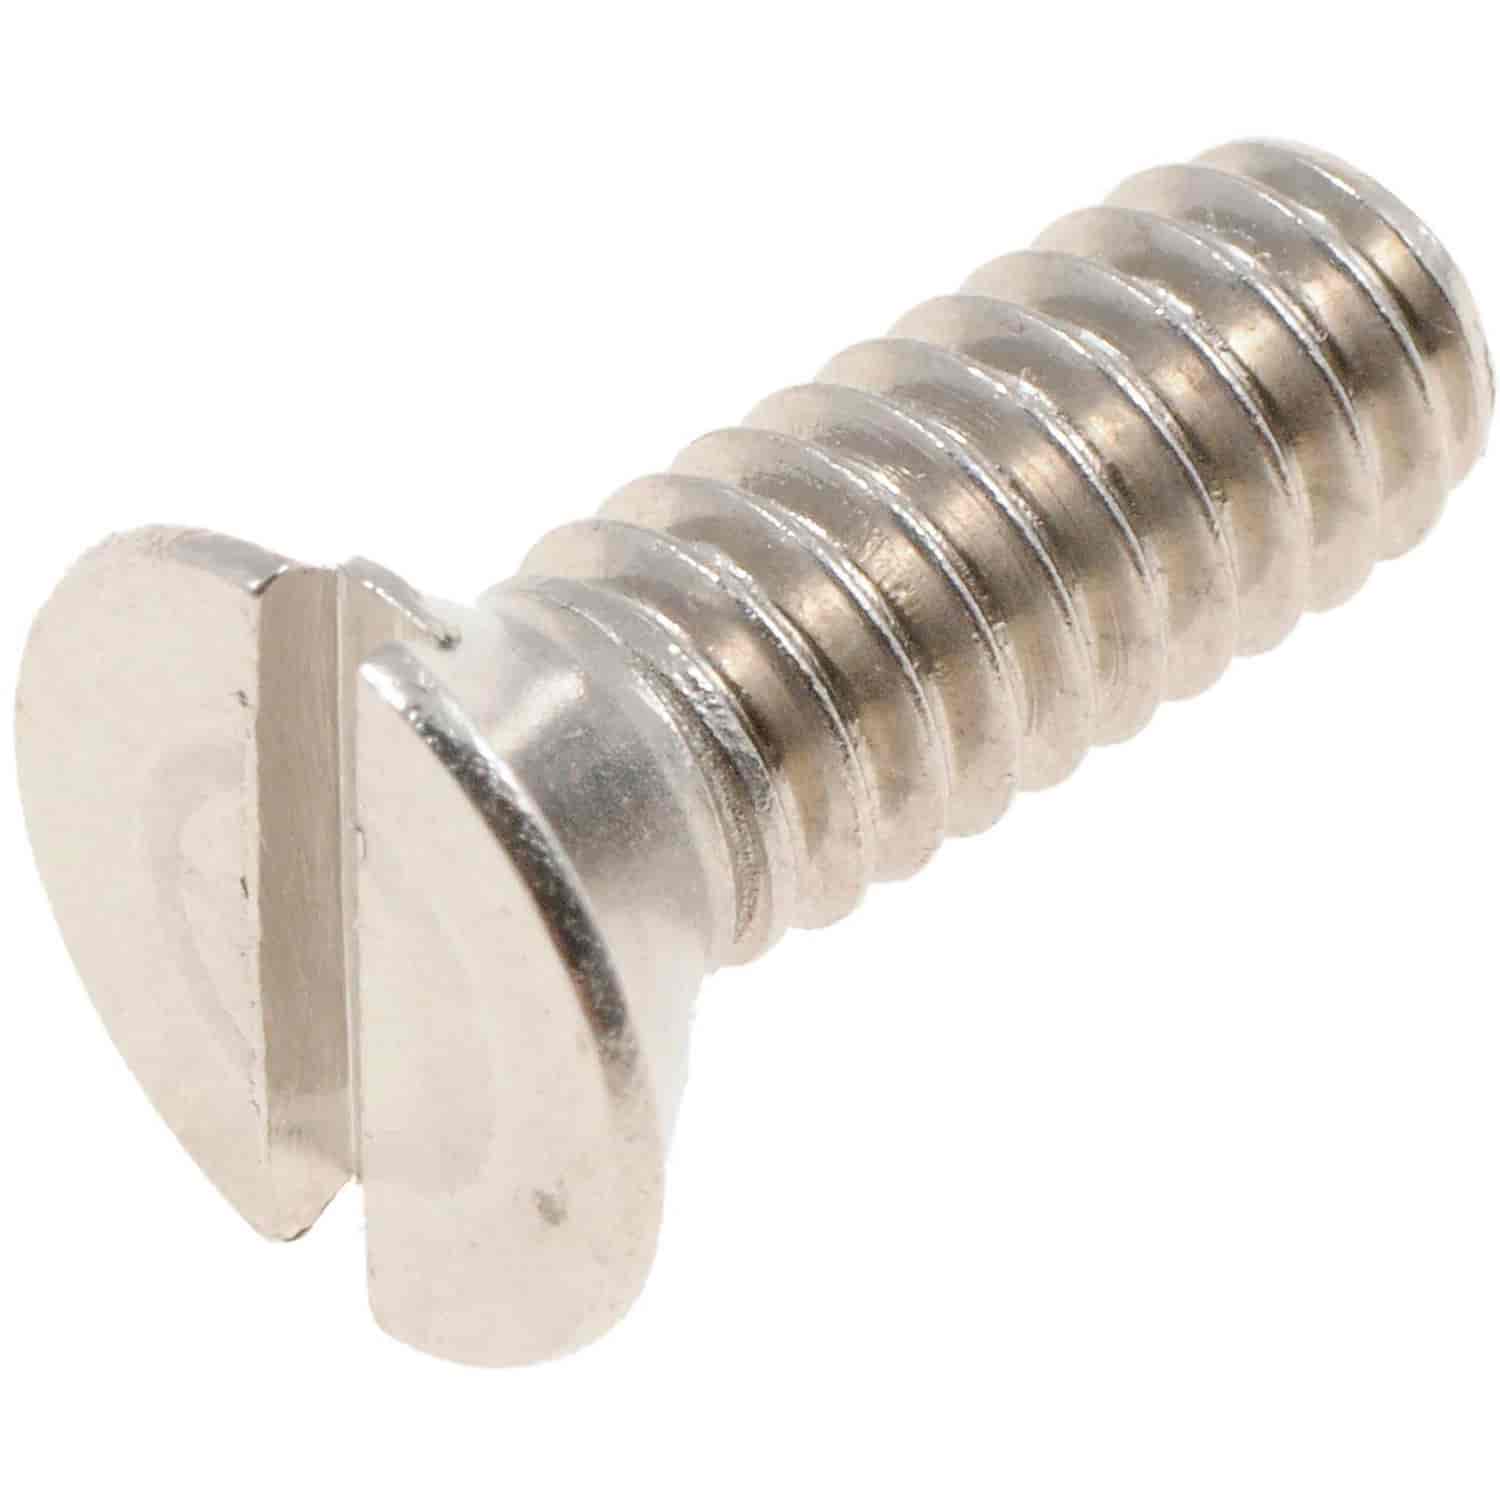 Machine Screw-Flat Slotted Head-Stainless Steel- 1/4-20 In. x 3/4 In.